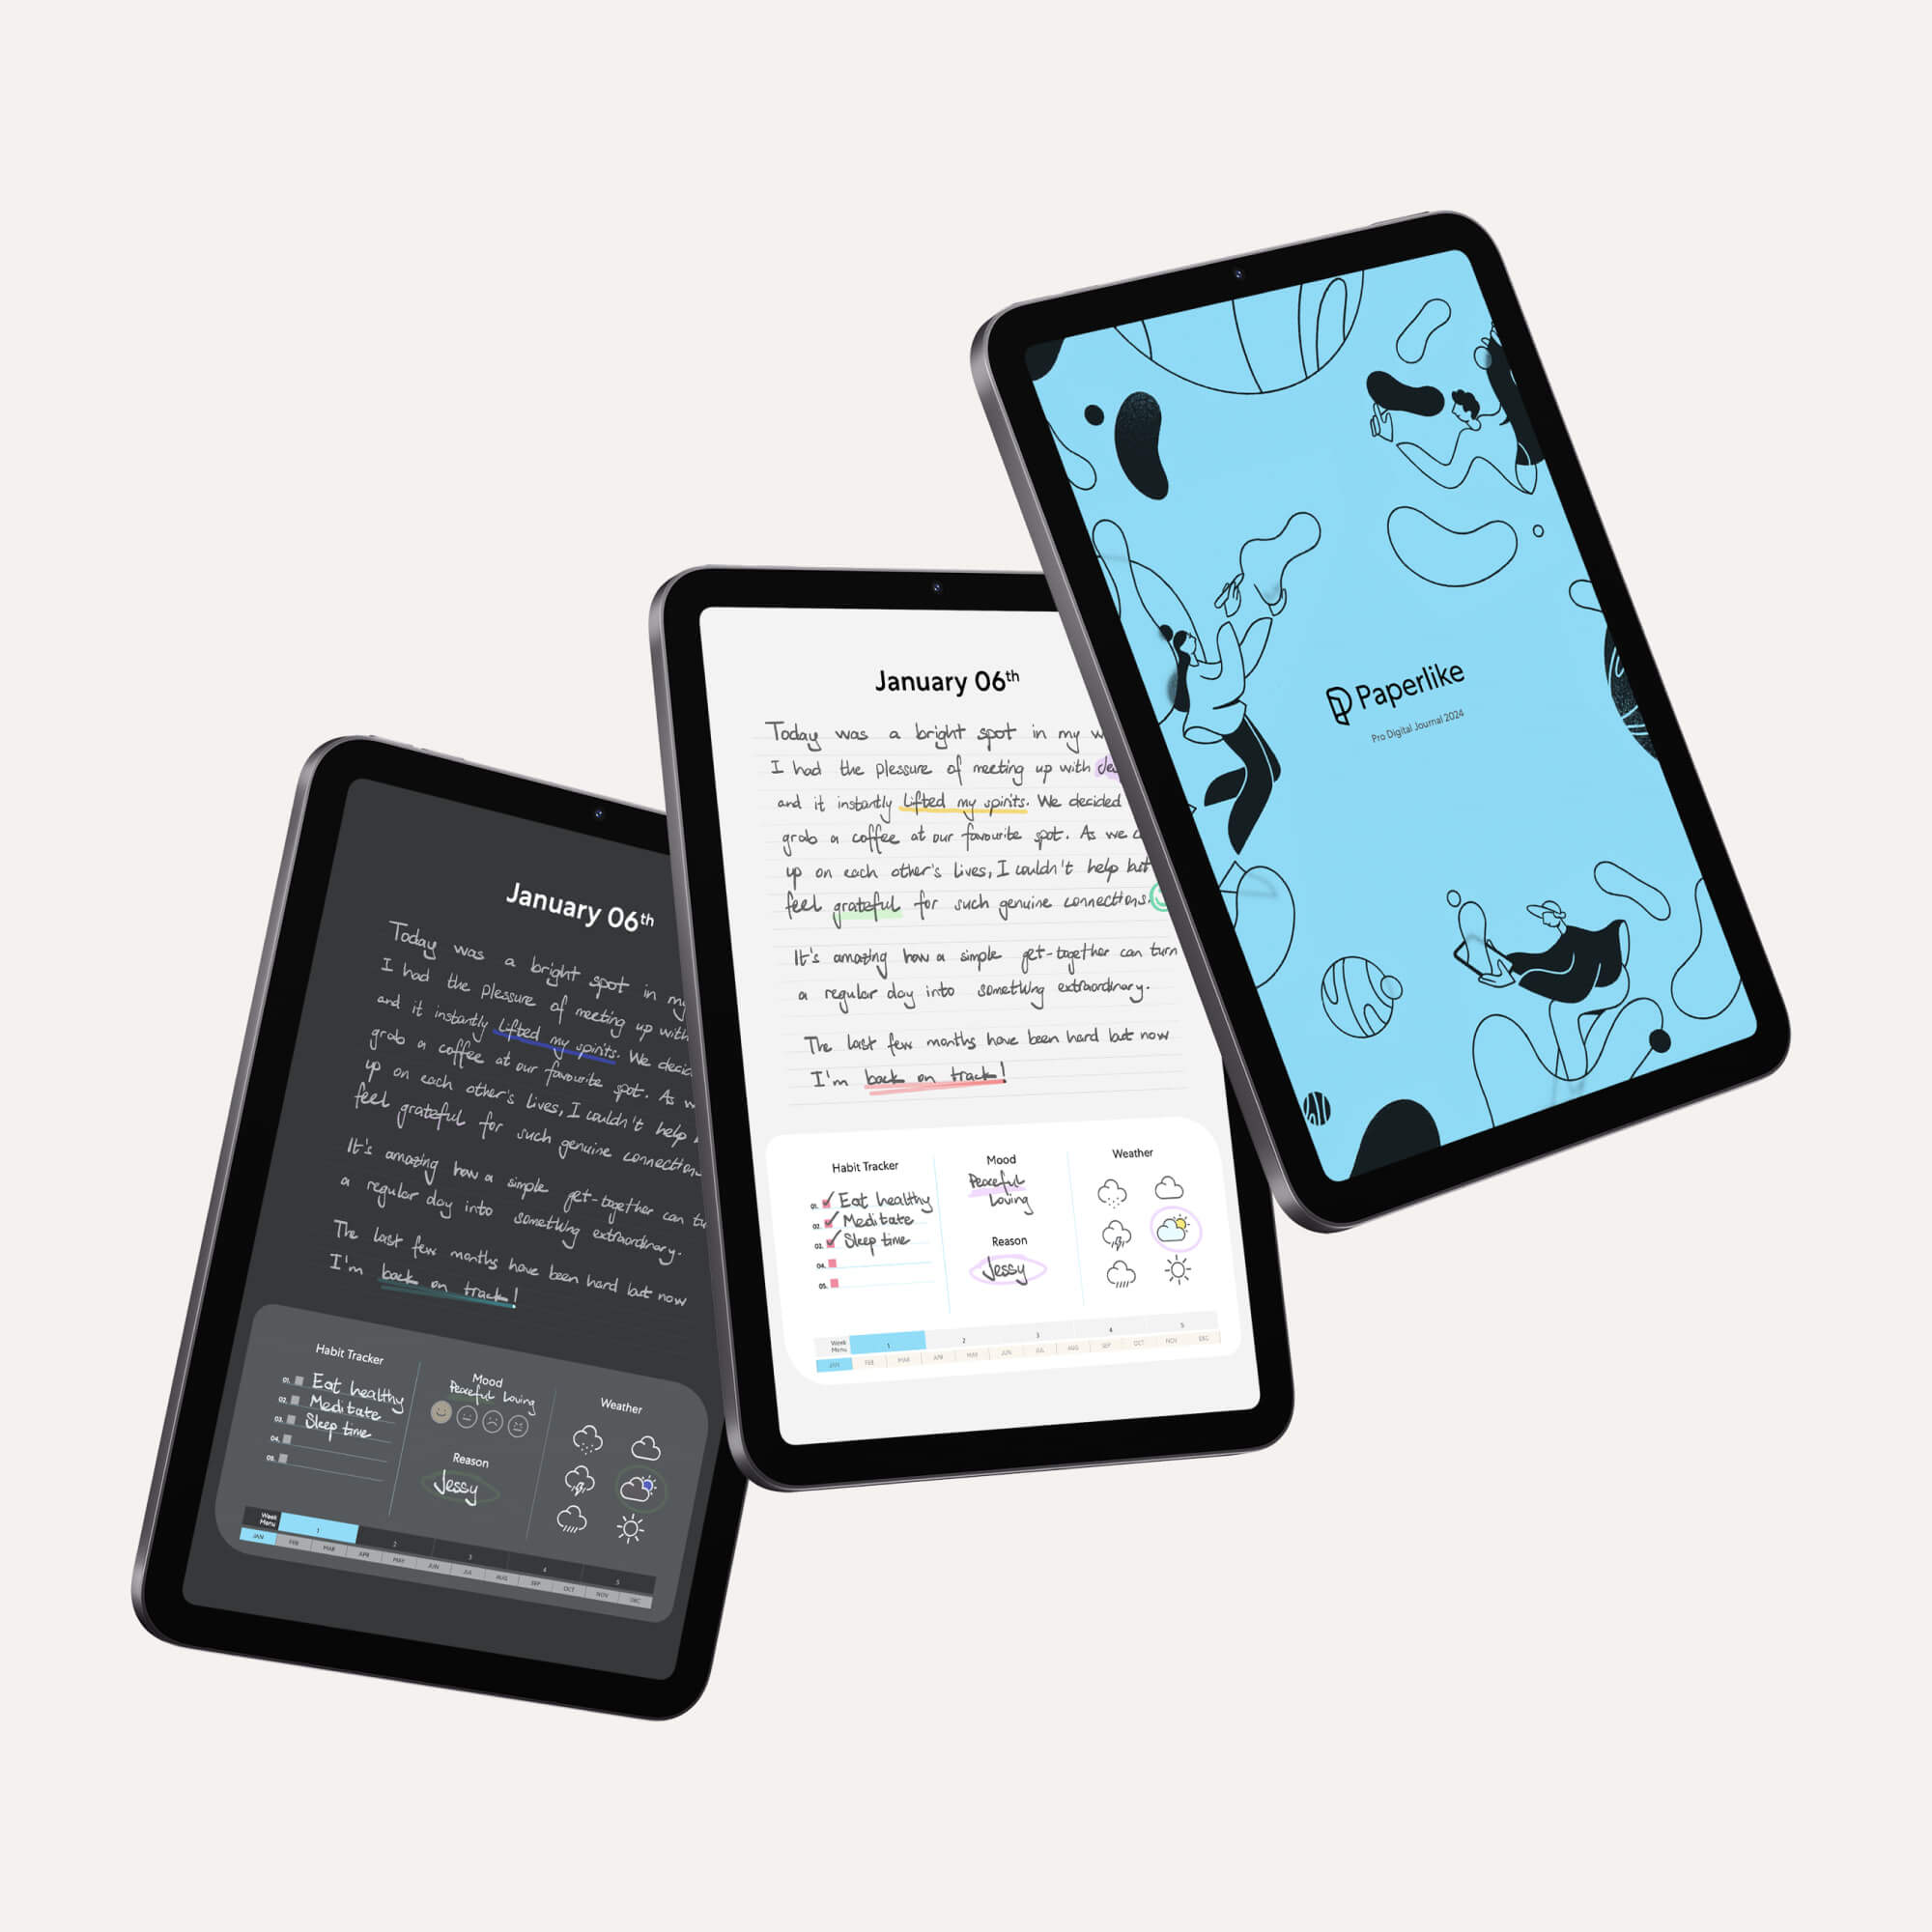 3 iPads with the digital journal on display in light and dark mode